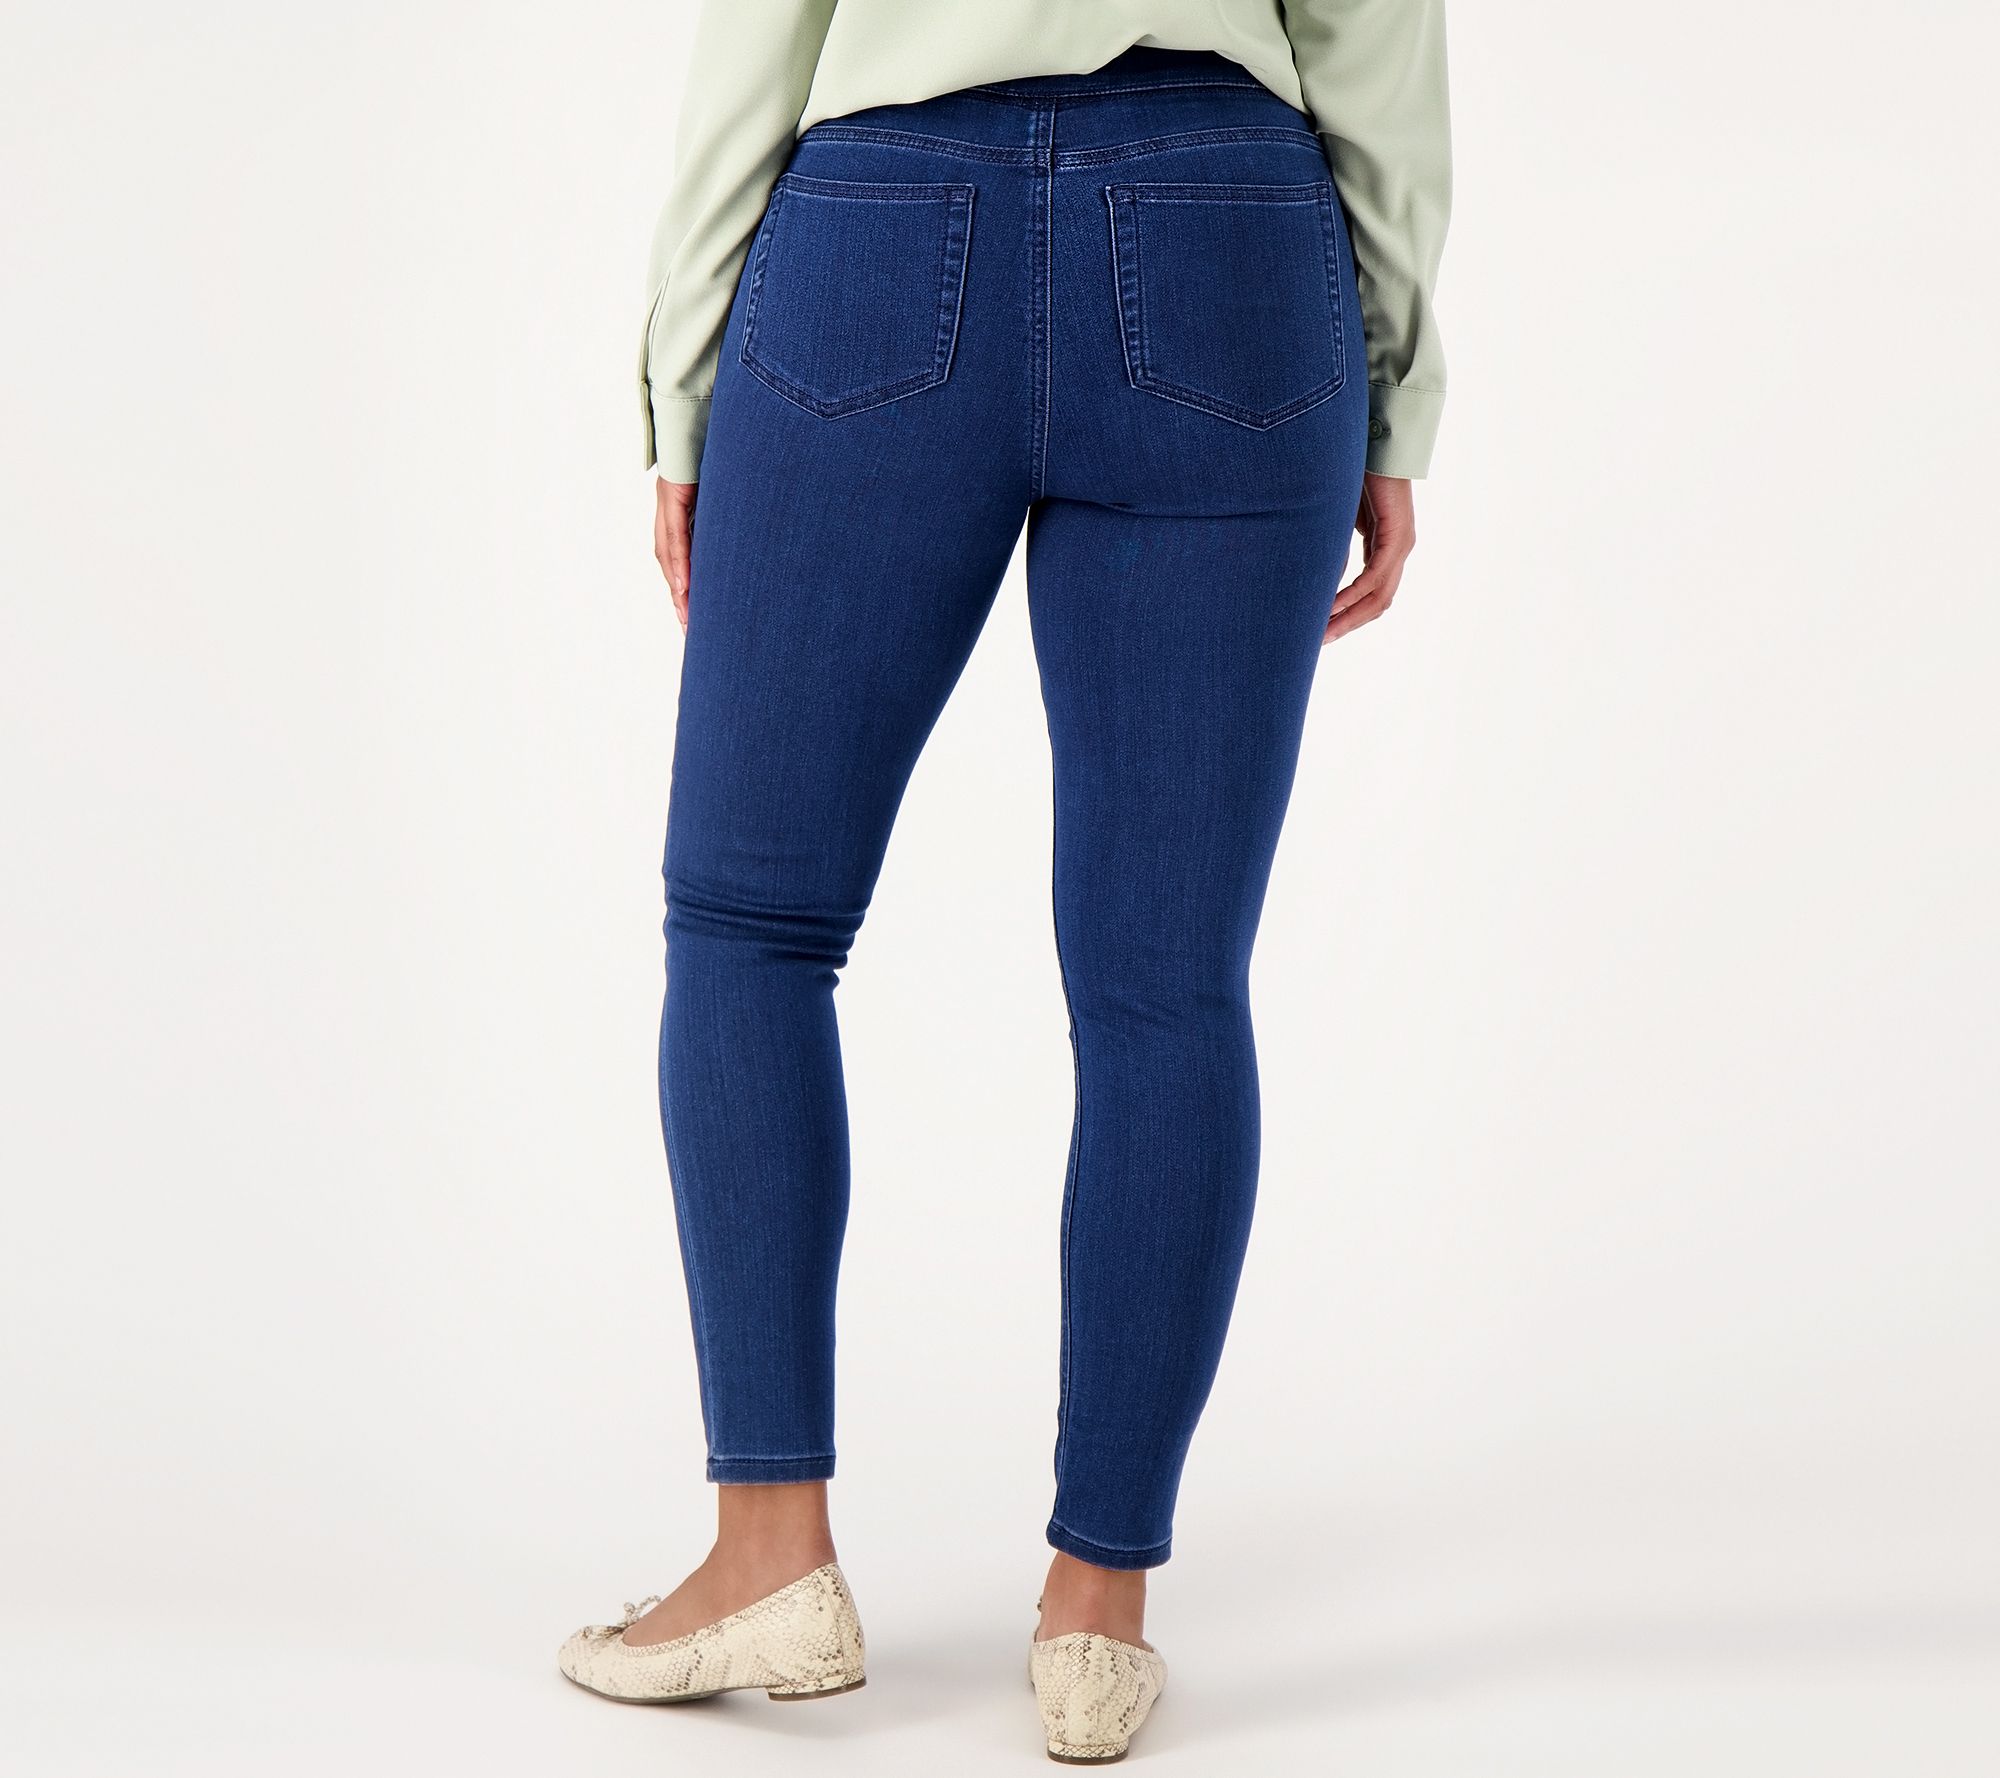 Denim & Co. Tall Silky Comfy Knit Jegging 